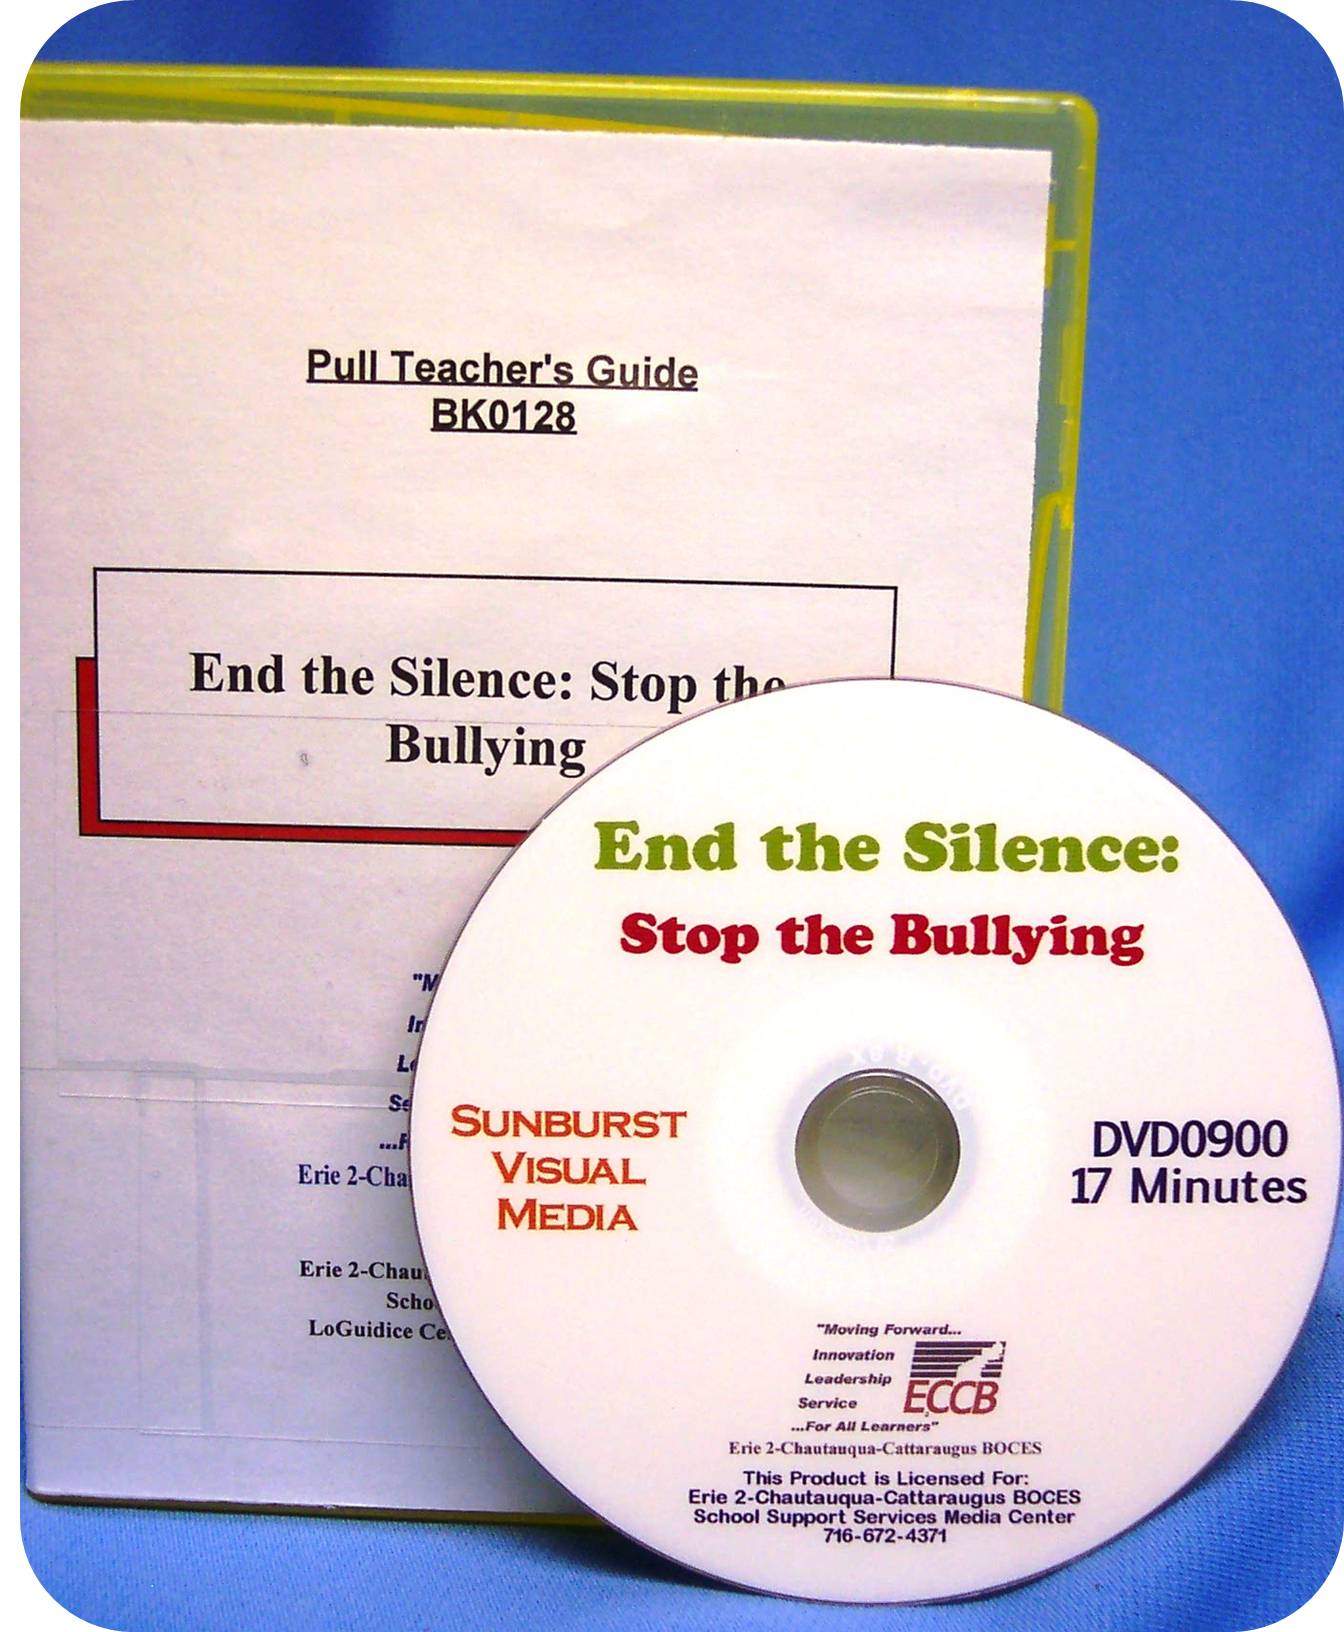 End the Silence: Stop the Bullying